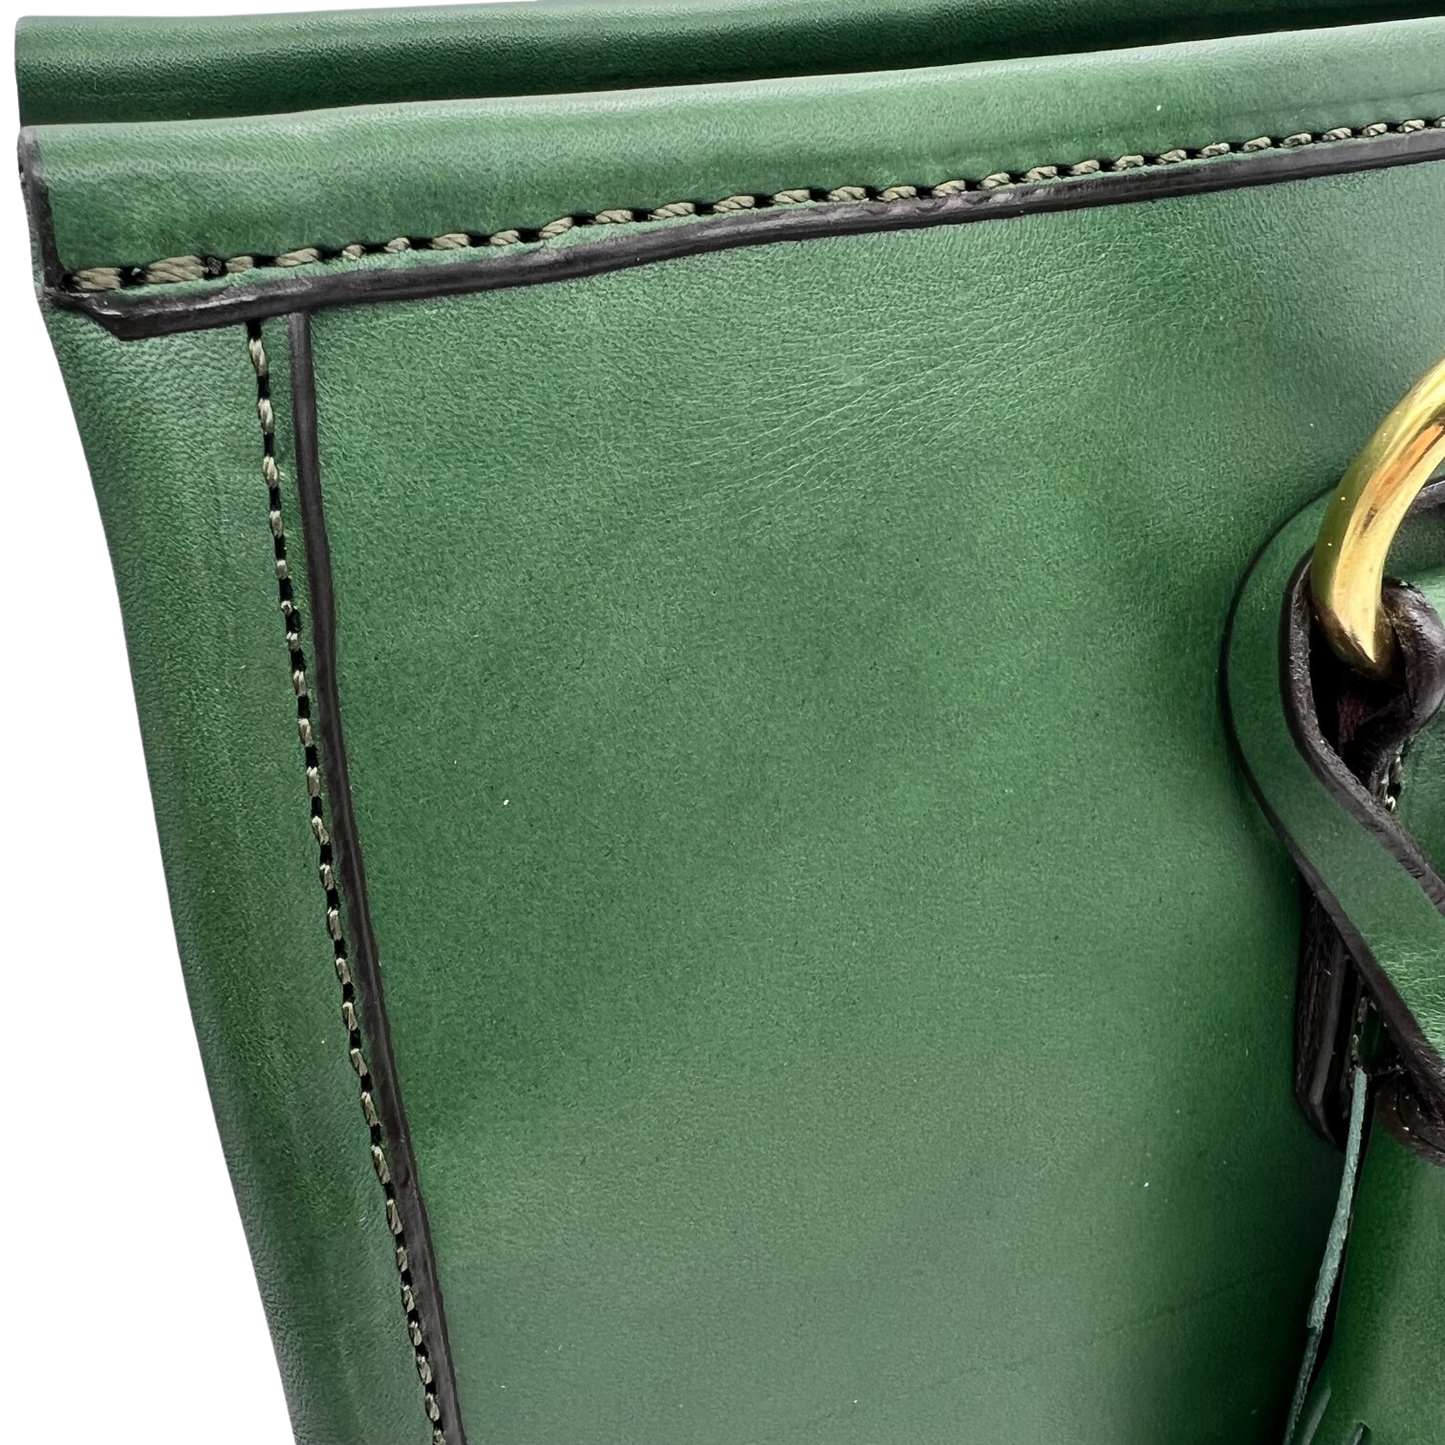 Sally Handbag in Zucchini Bridle Leather- 2 options